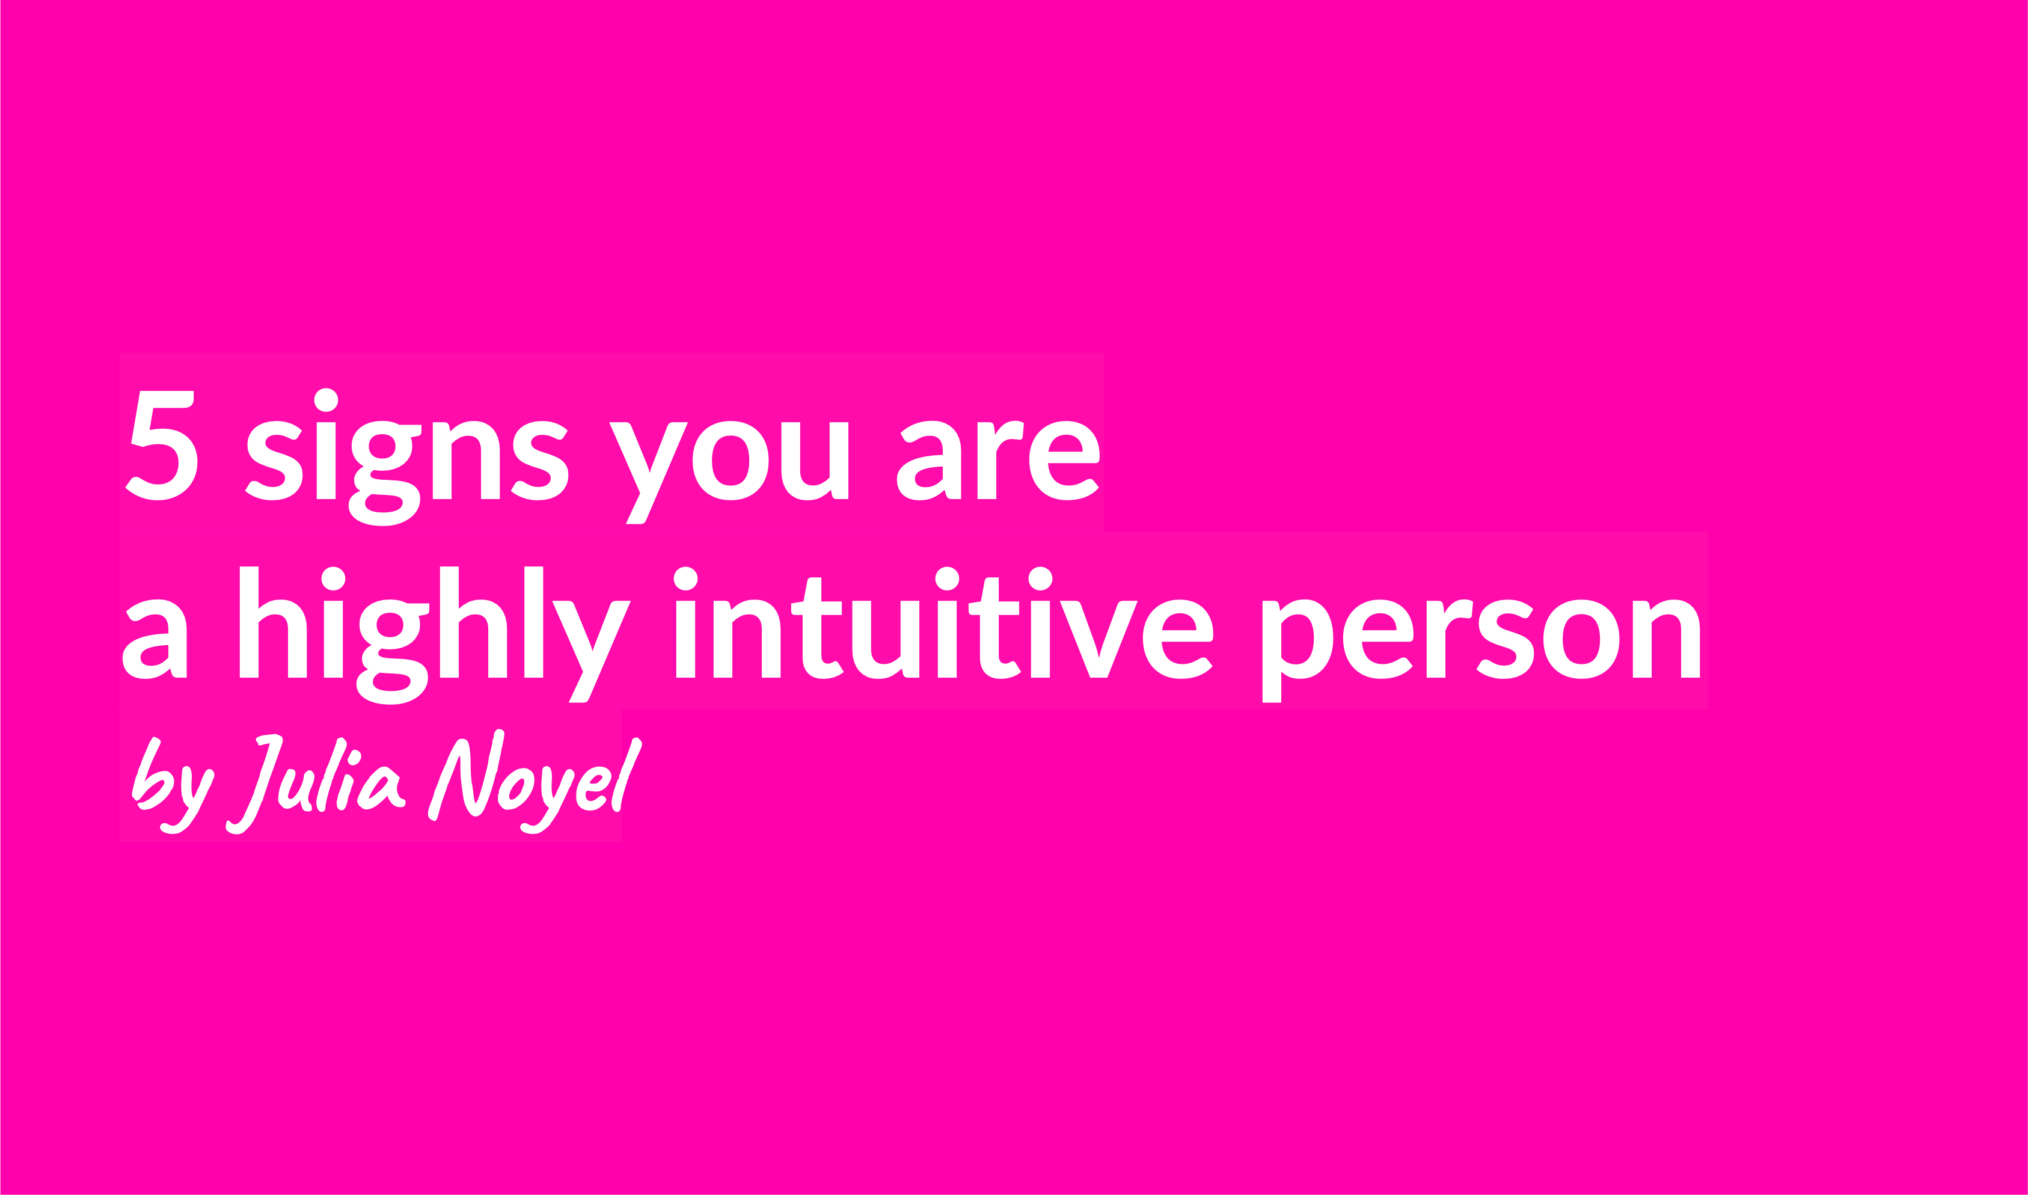 5 signs you are a highly intuitive person by Julia Noyel